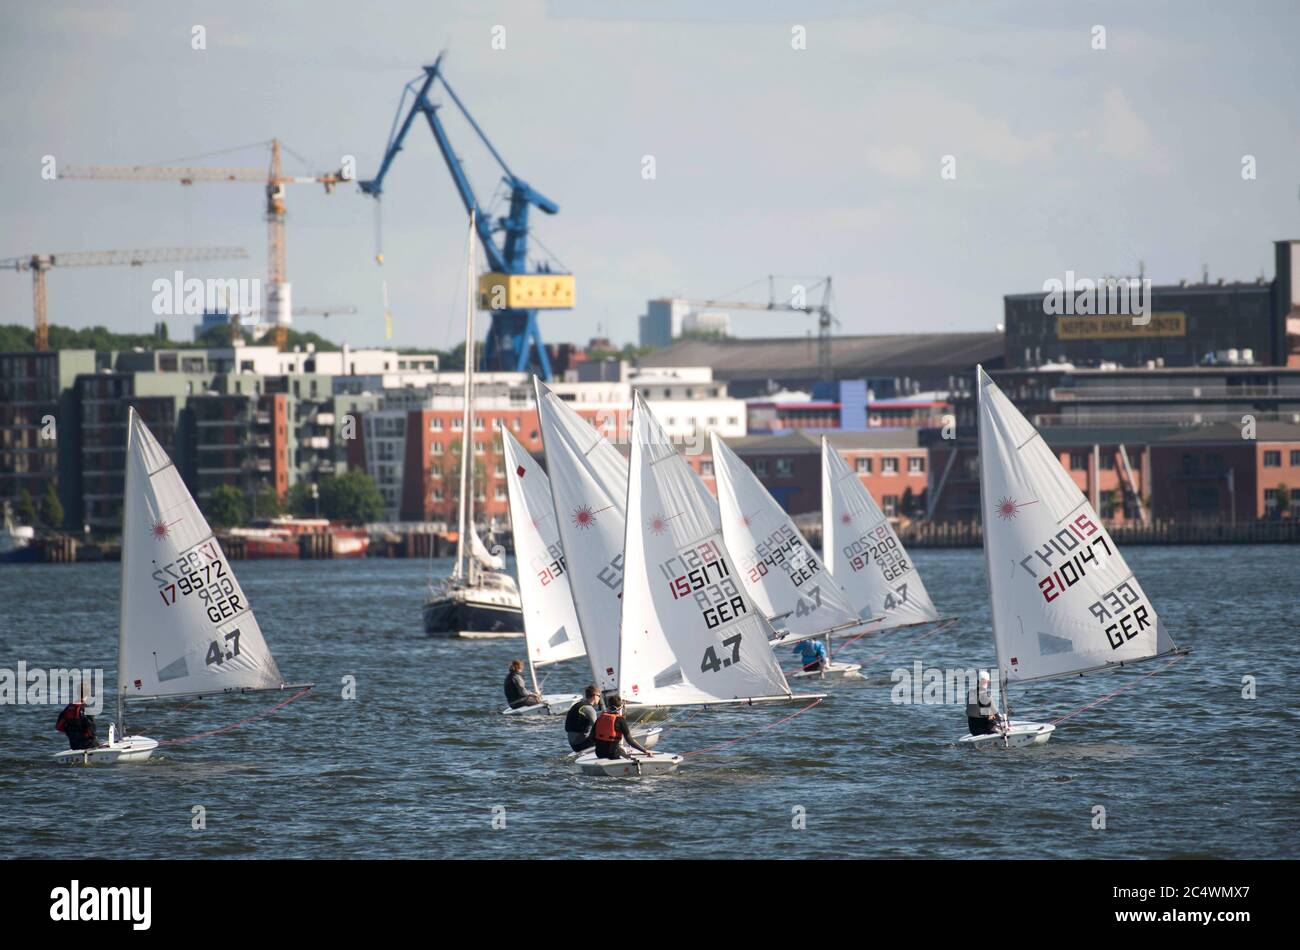 Rostock, Germany. 25th June, 2020. Optimist dinghies train on the Warnow in Rostock. With this small and light dinghy, children and young people train for regatta sports in the Hanseatic city. Credit: Nordlicht Rostock/dpa-Zentralbild/ZB/dpa/Alamy Live News Stock Photo